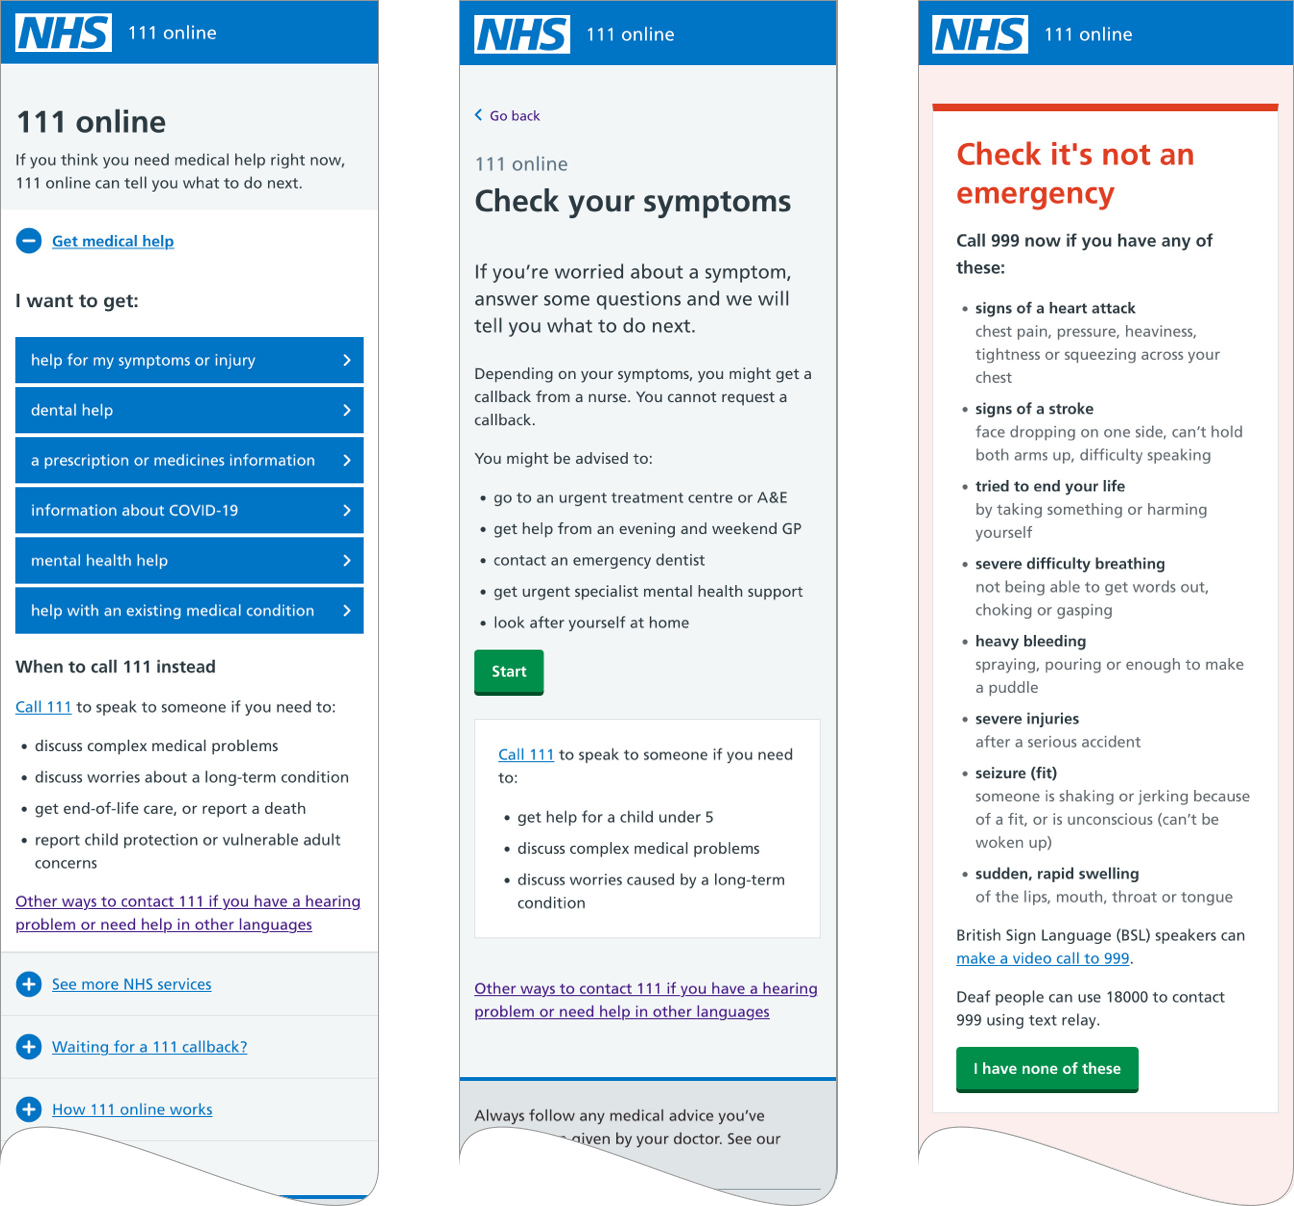 Screen grabs of the new first 3 steps of 111.nhs.uk